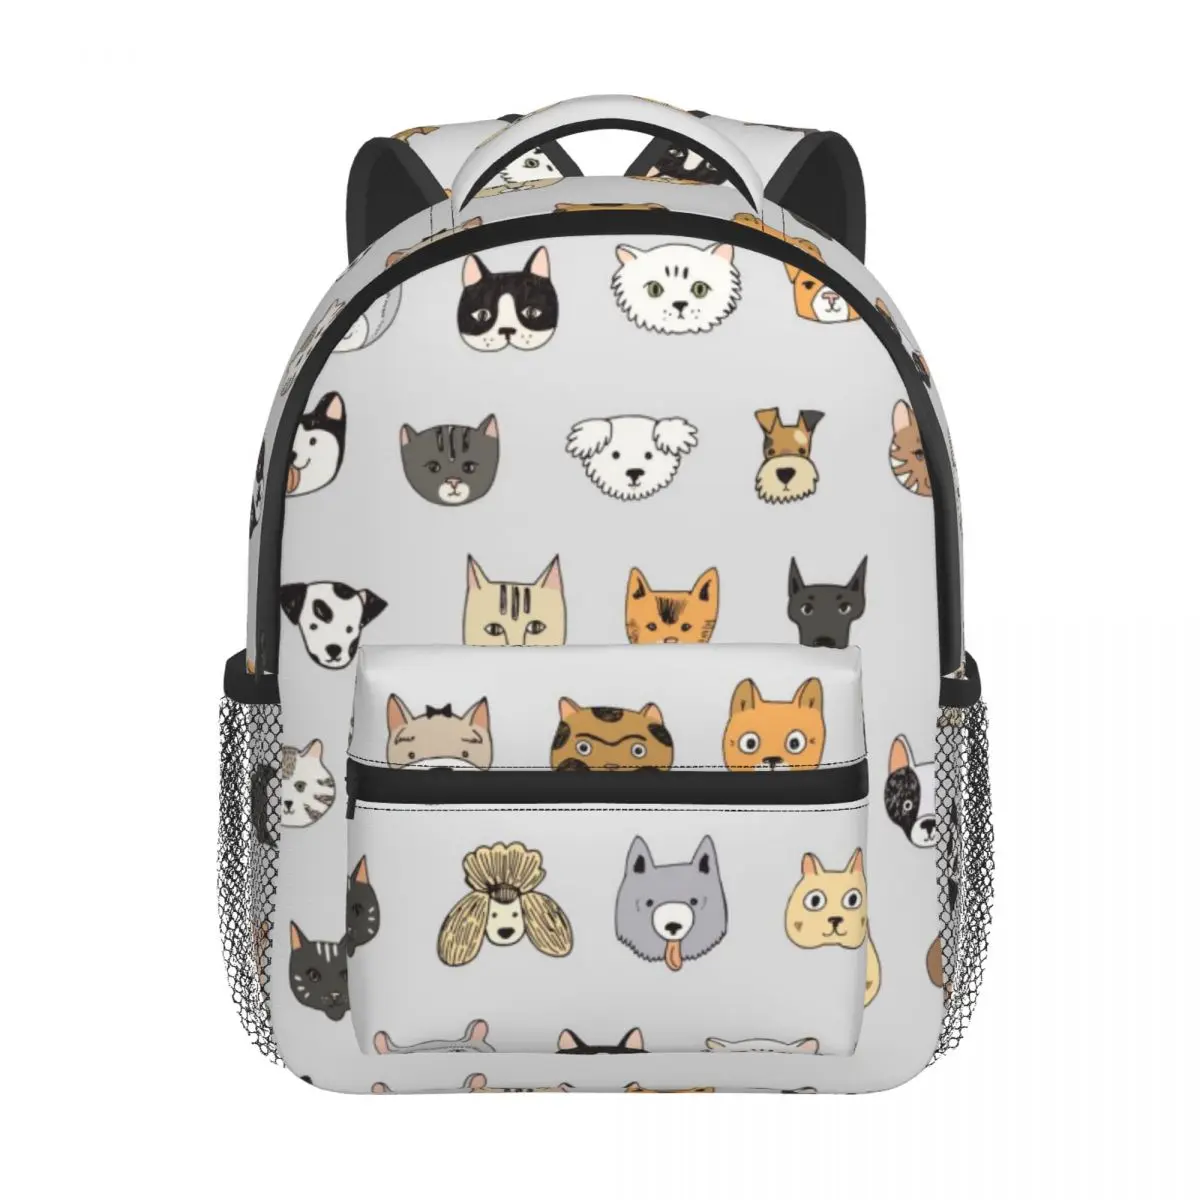 Cats And Dogs Animal Pattern Kids Backpack Toddler School Bag Kindergarten Mochila for Boys Girls 2-5 Years